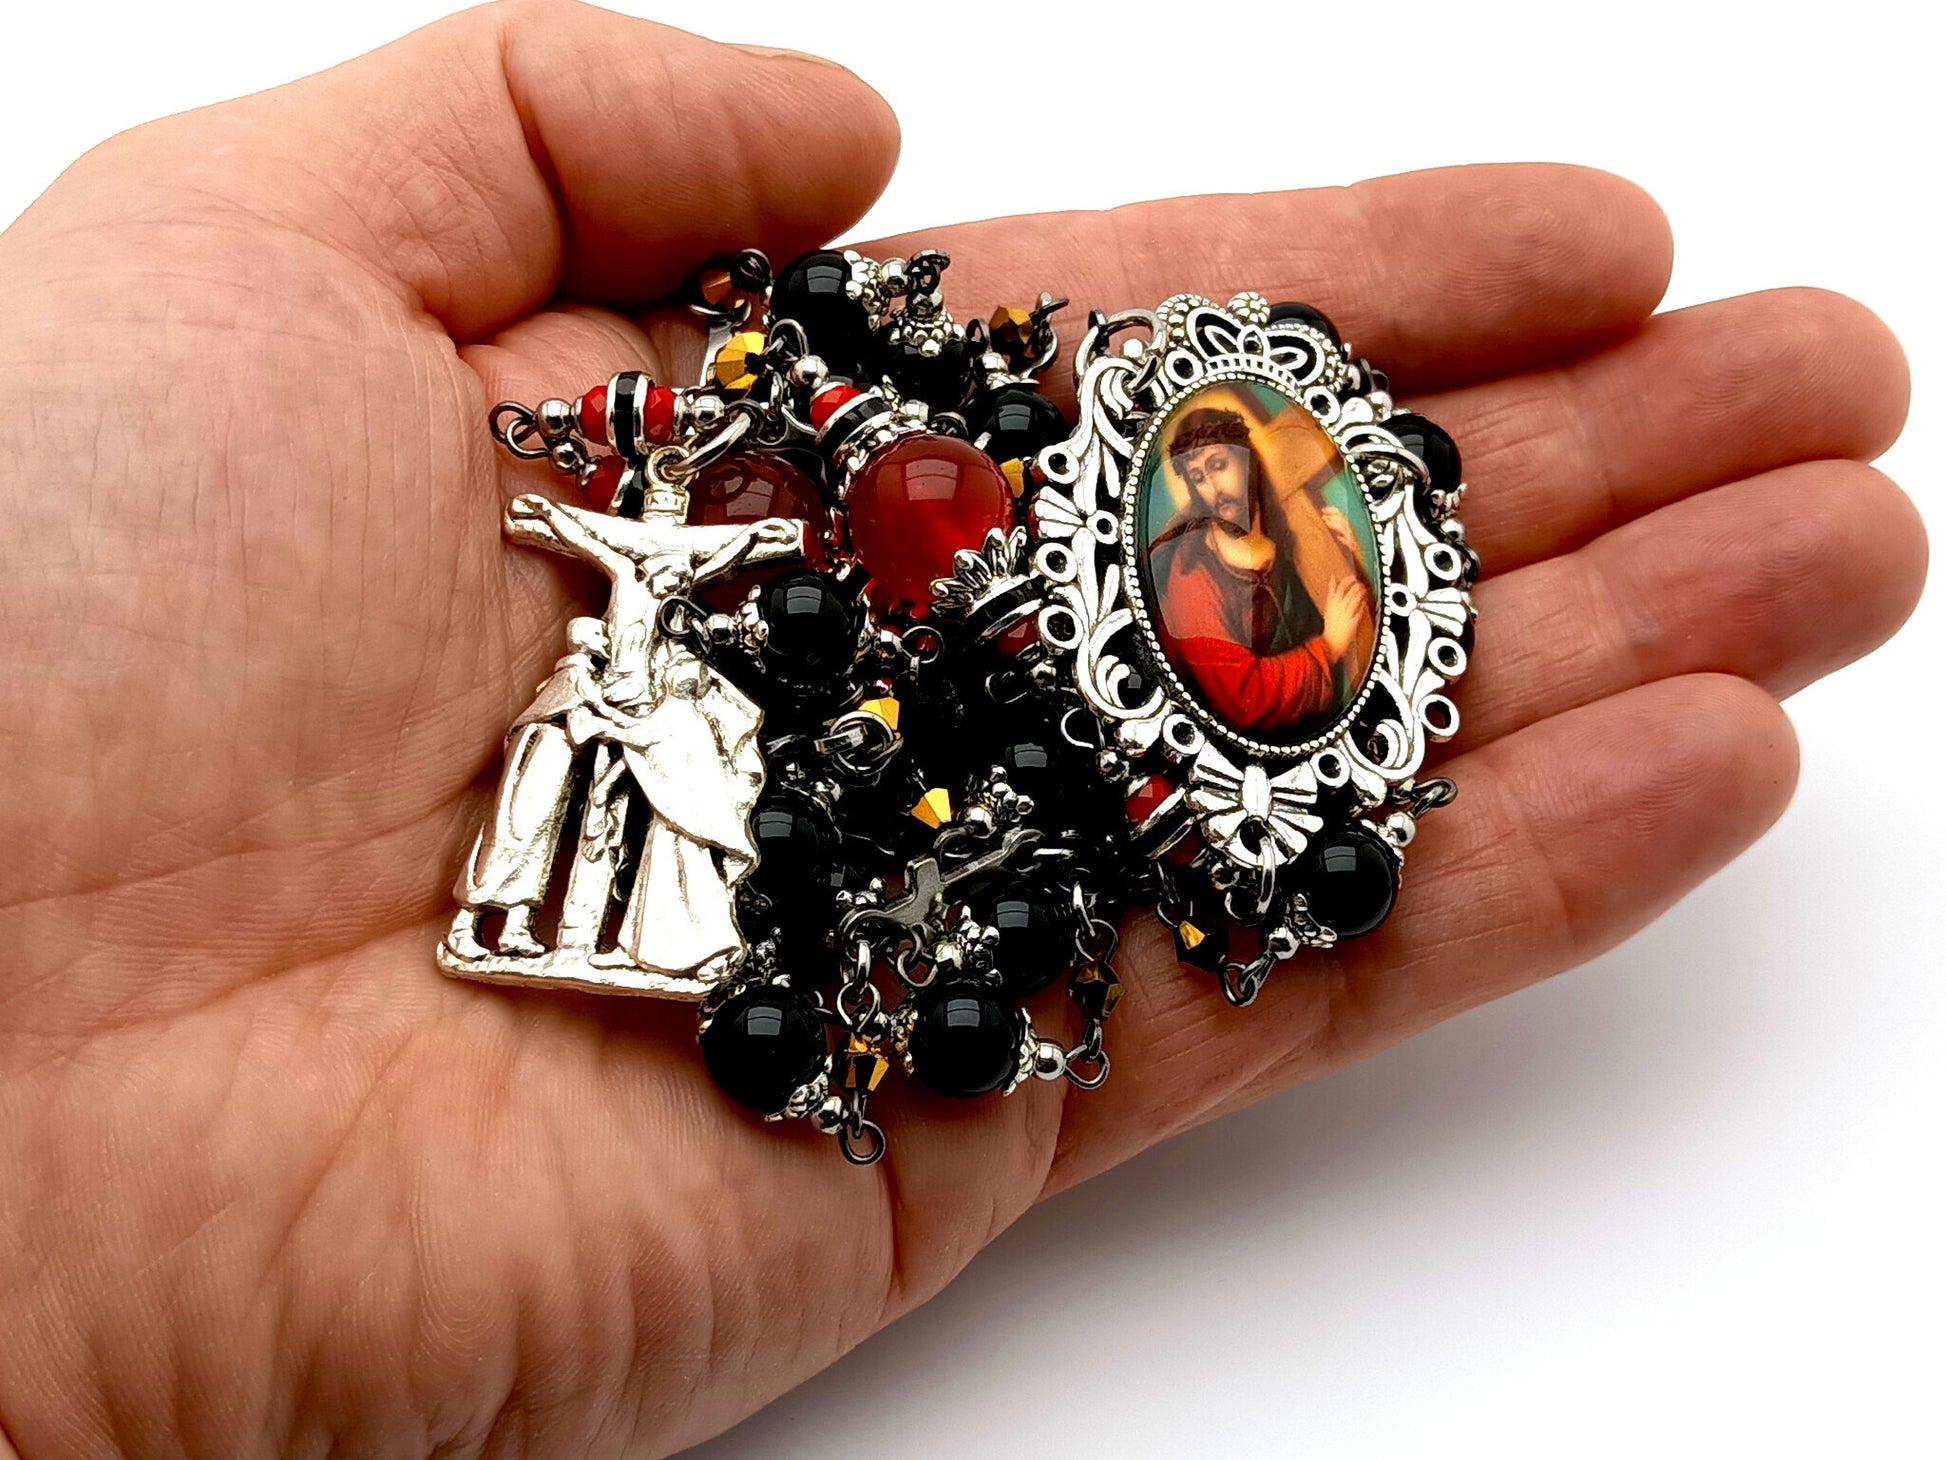 Station of the cross unique rosary beads prayer chaplet with onyx and ruby gemstone, stainless steel cross beads and Virgin Mary and Saint John crucifix.